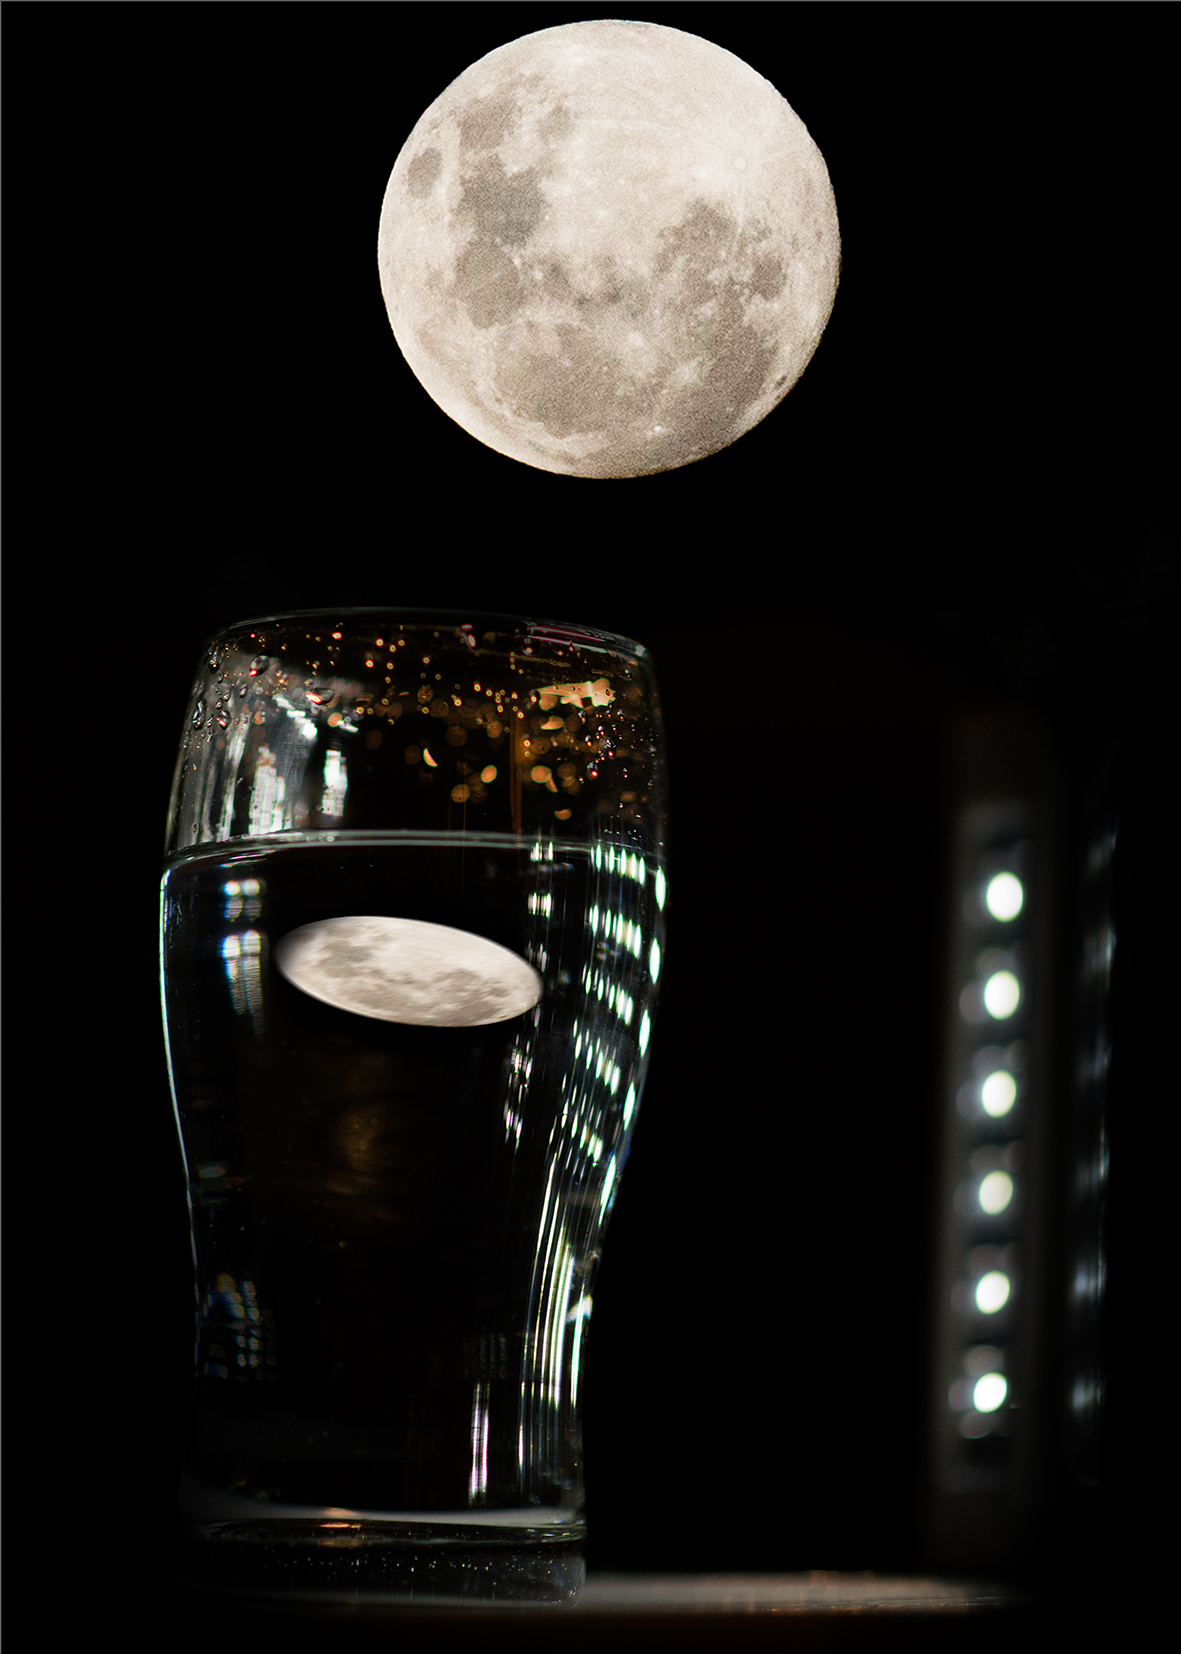 A sip of the Moon...